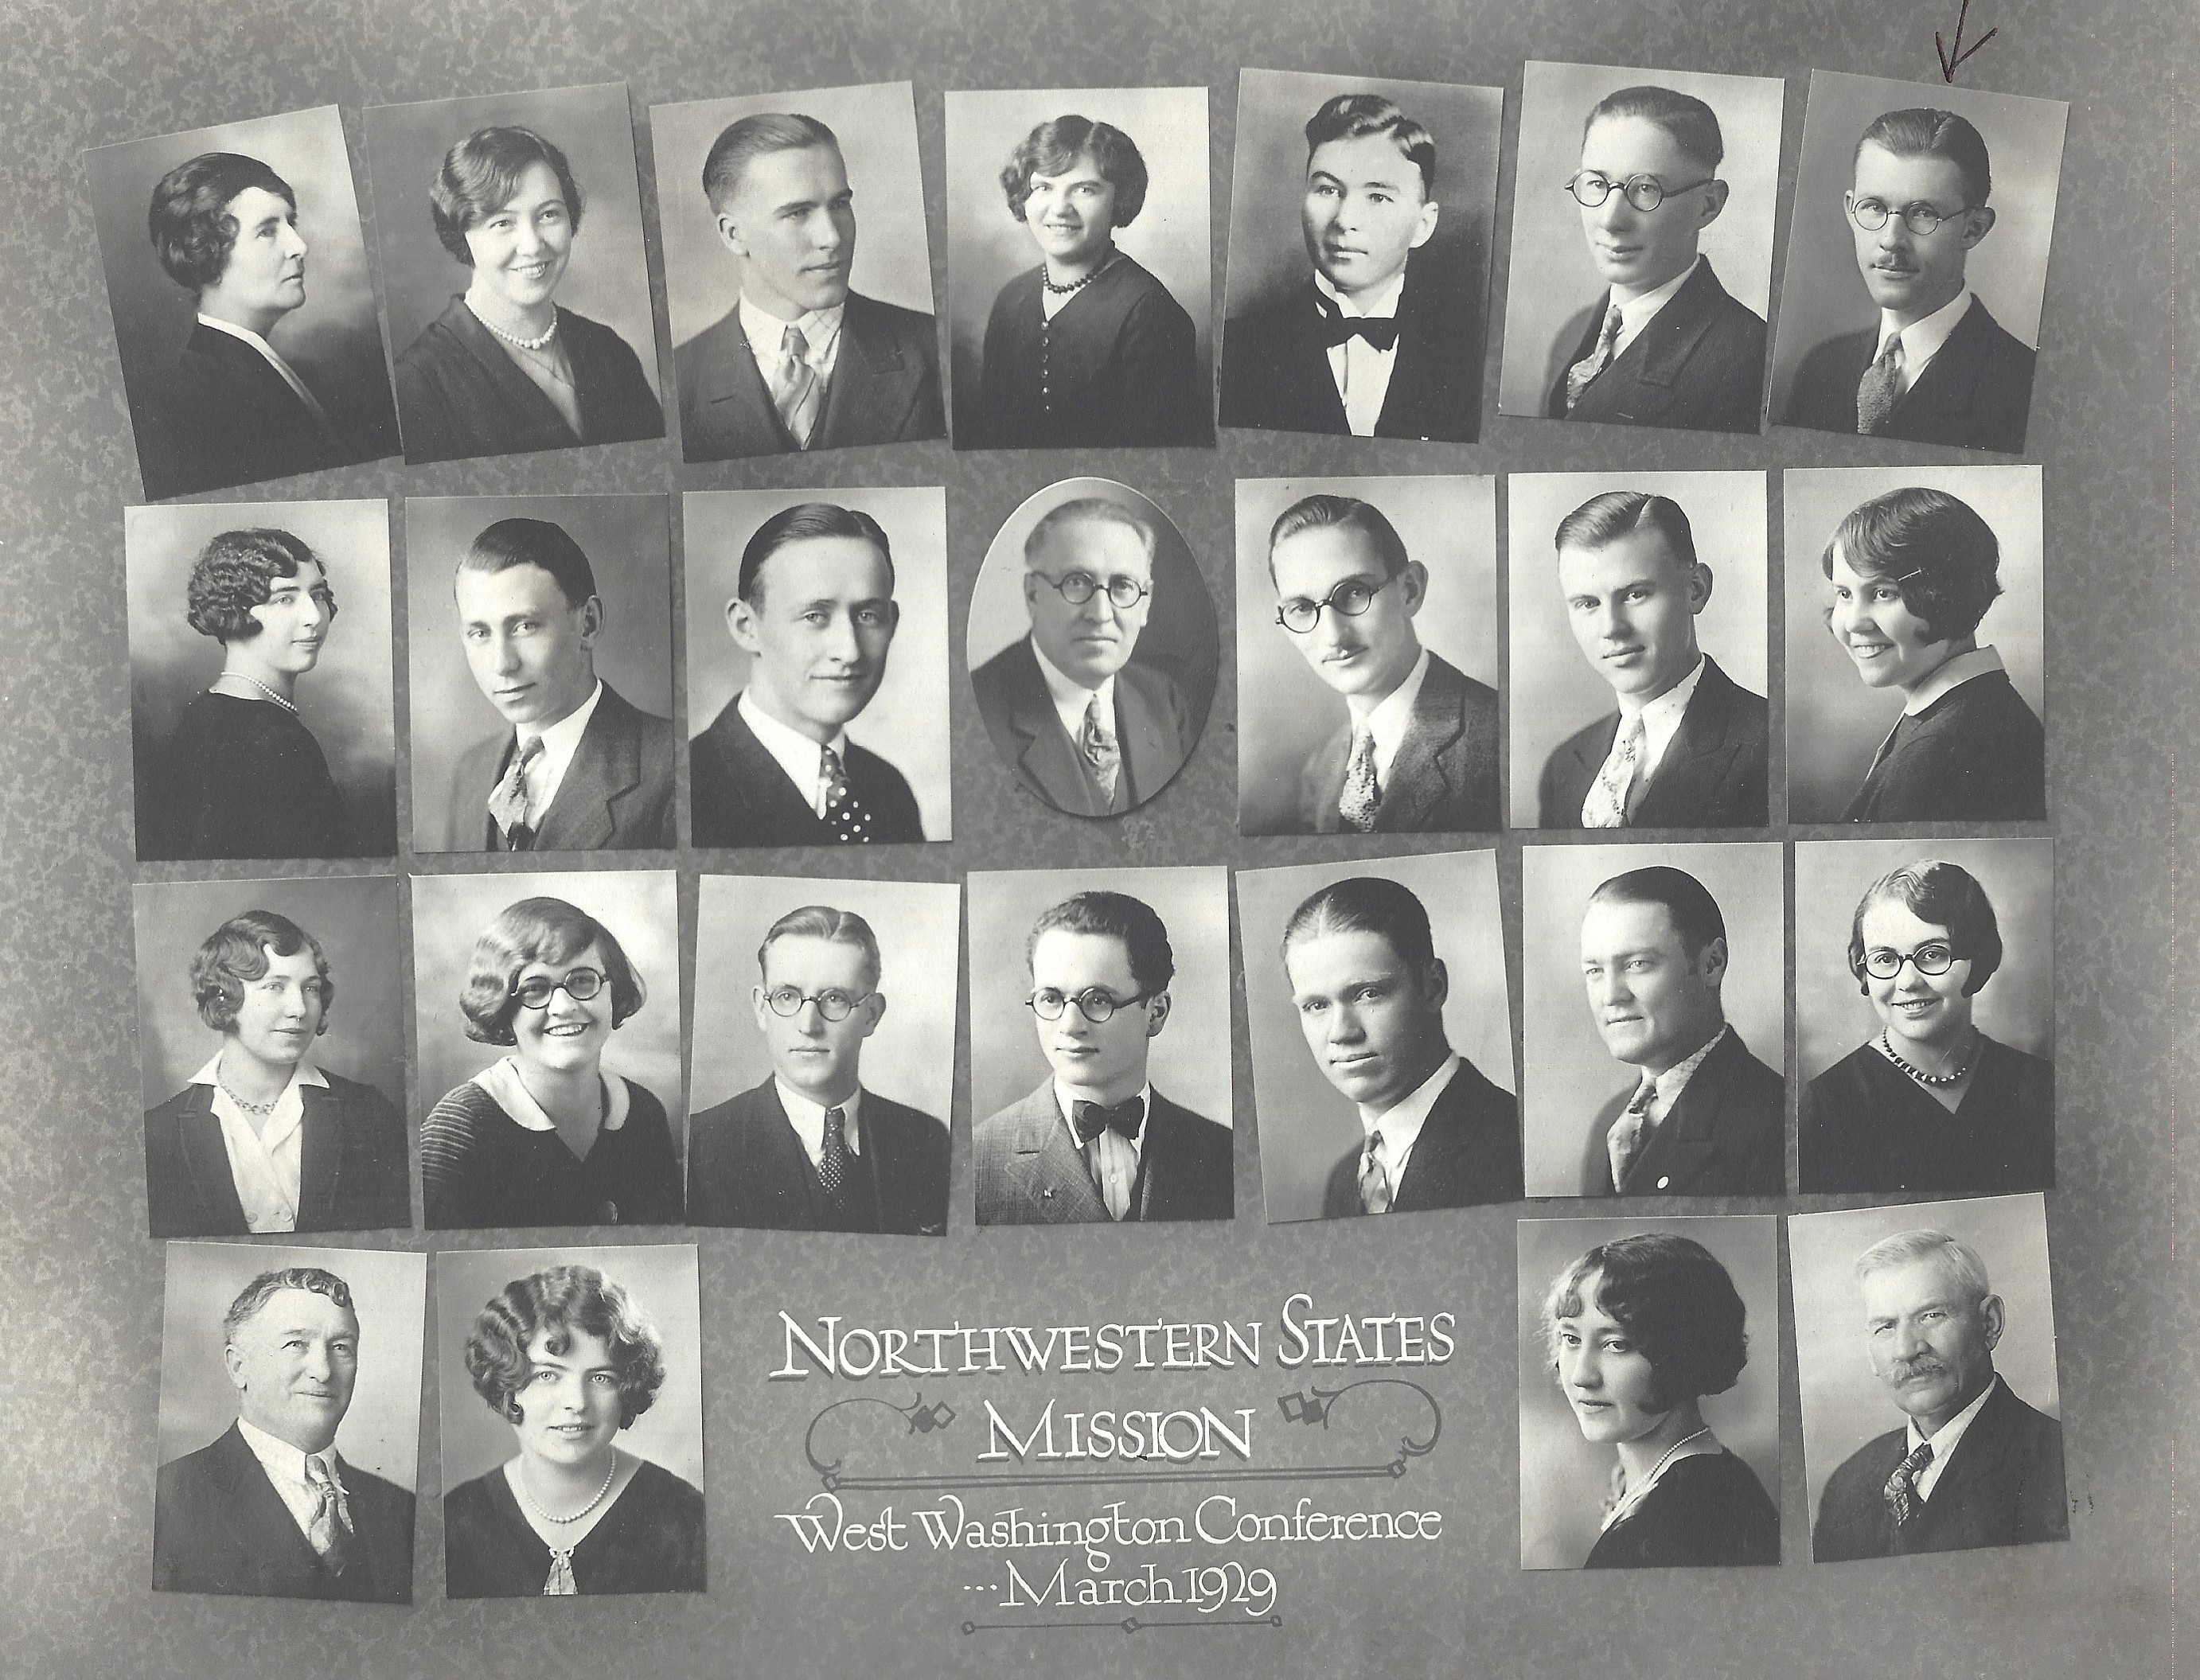 Northwestern States Mission, West Washington Conference, March 1929,  1929 March